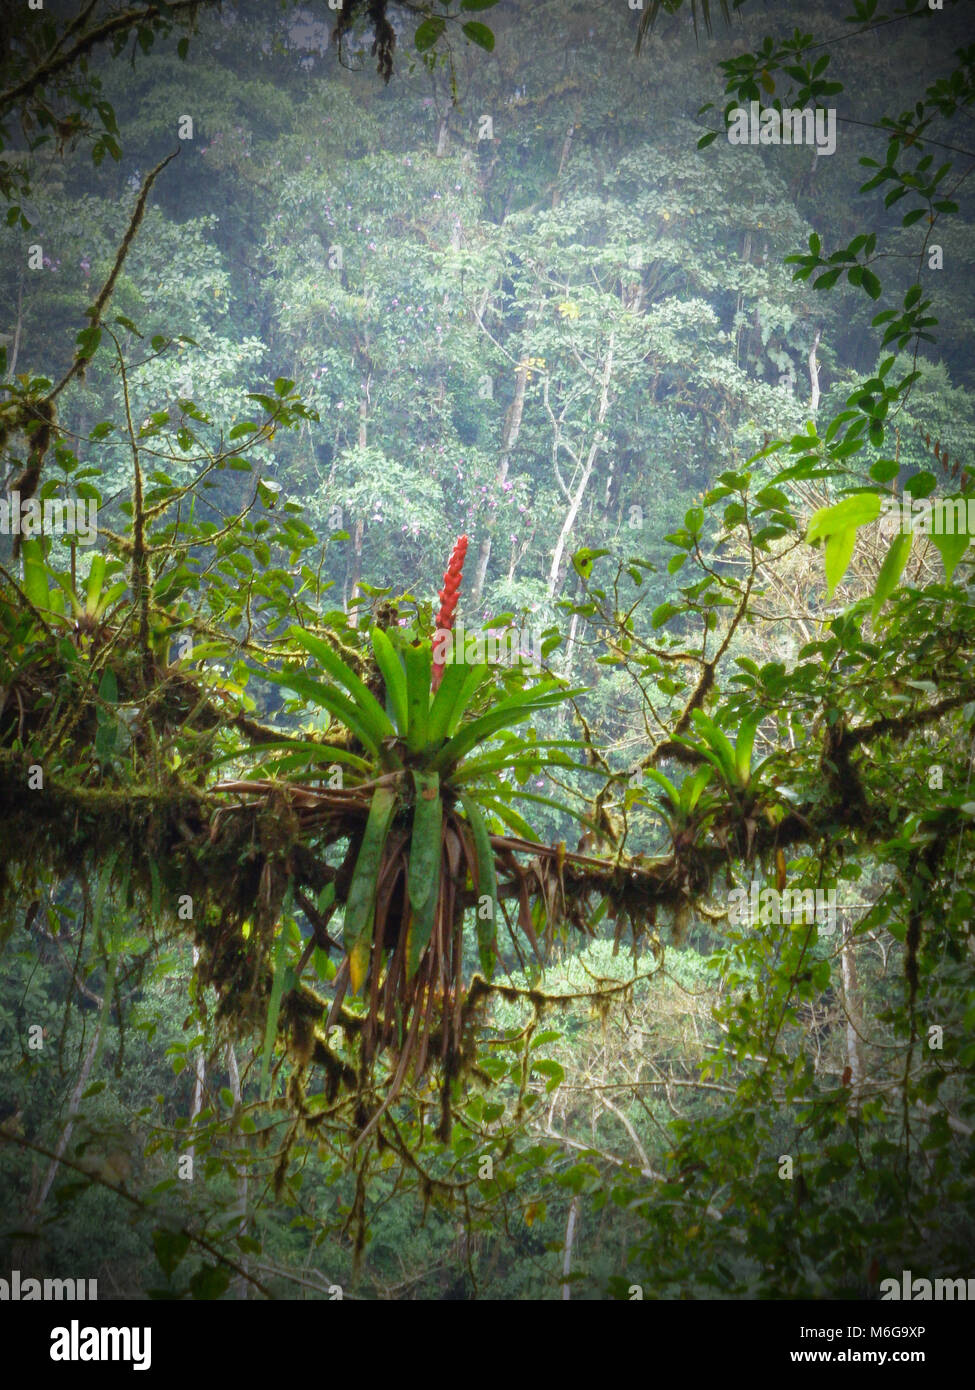 Vertically exposed bromeliad growing on host branch surrounded by fog and lush green could forest of Ecuador. Stock Photo